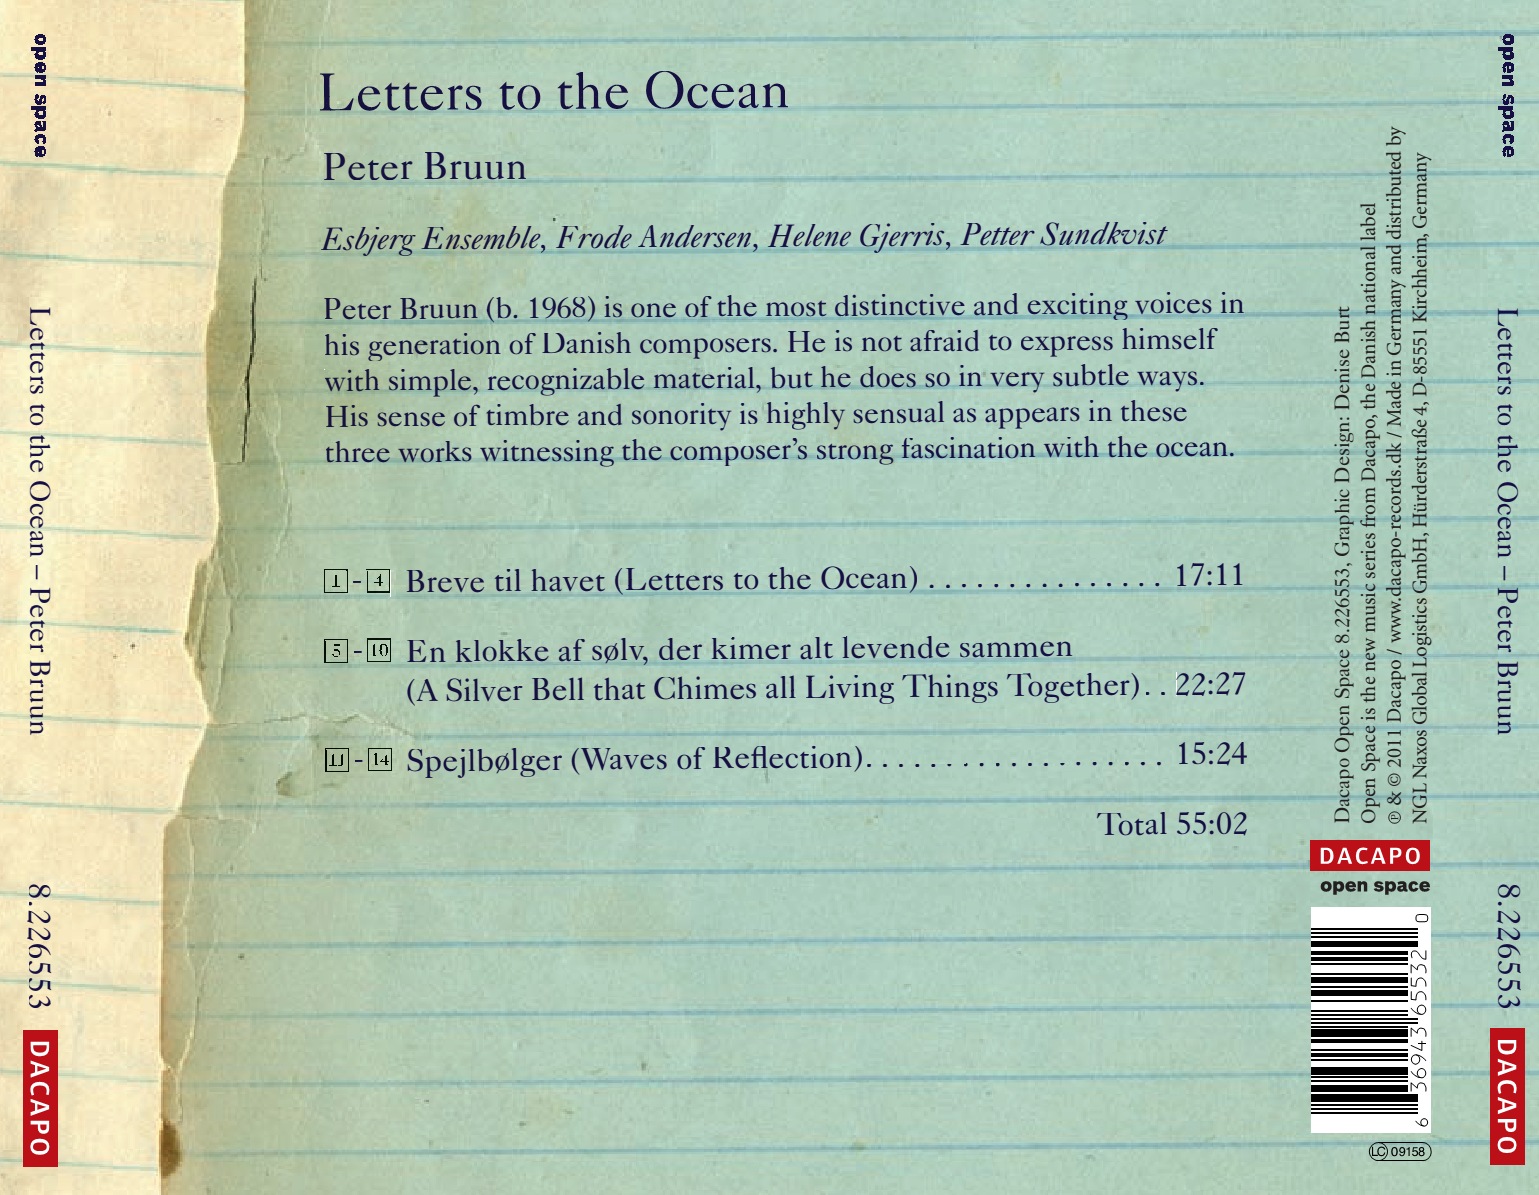 BRUUN: Letters to the Ocean, A Silver Bell that Chimes all Living Things Together, Waves of Reflection - slide-1